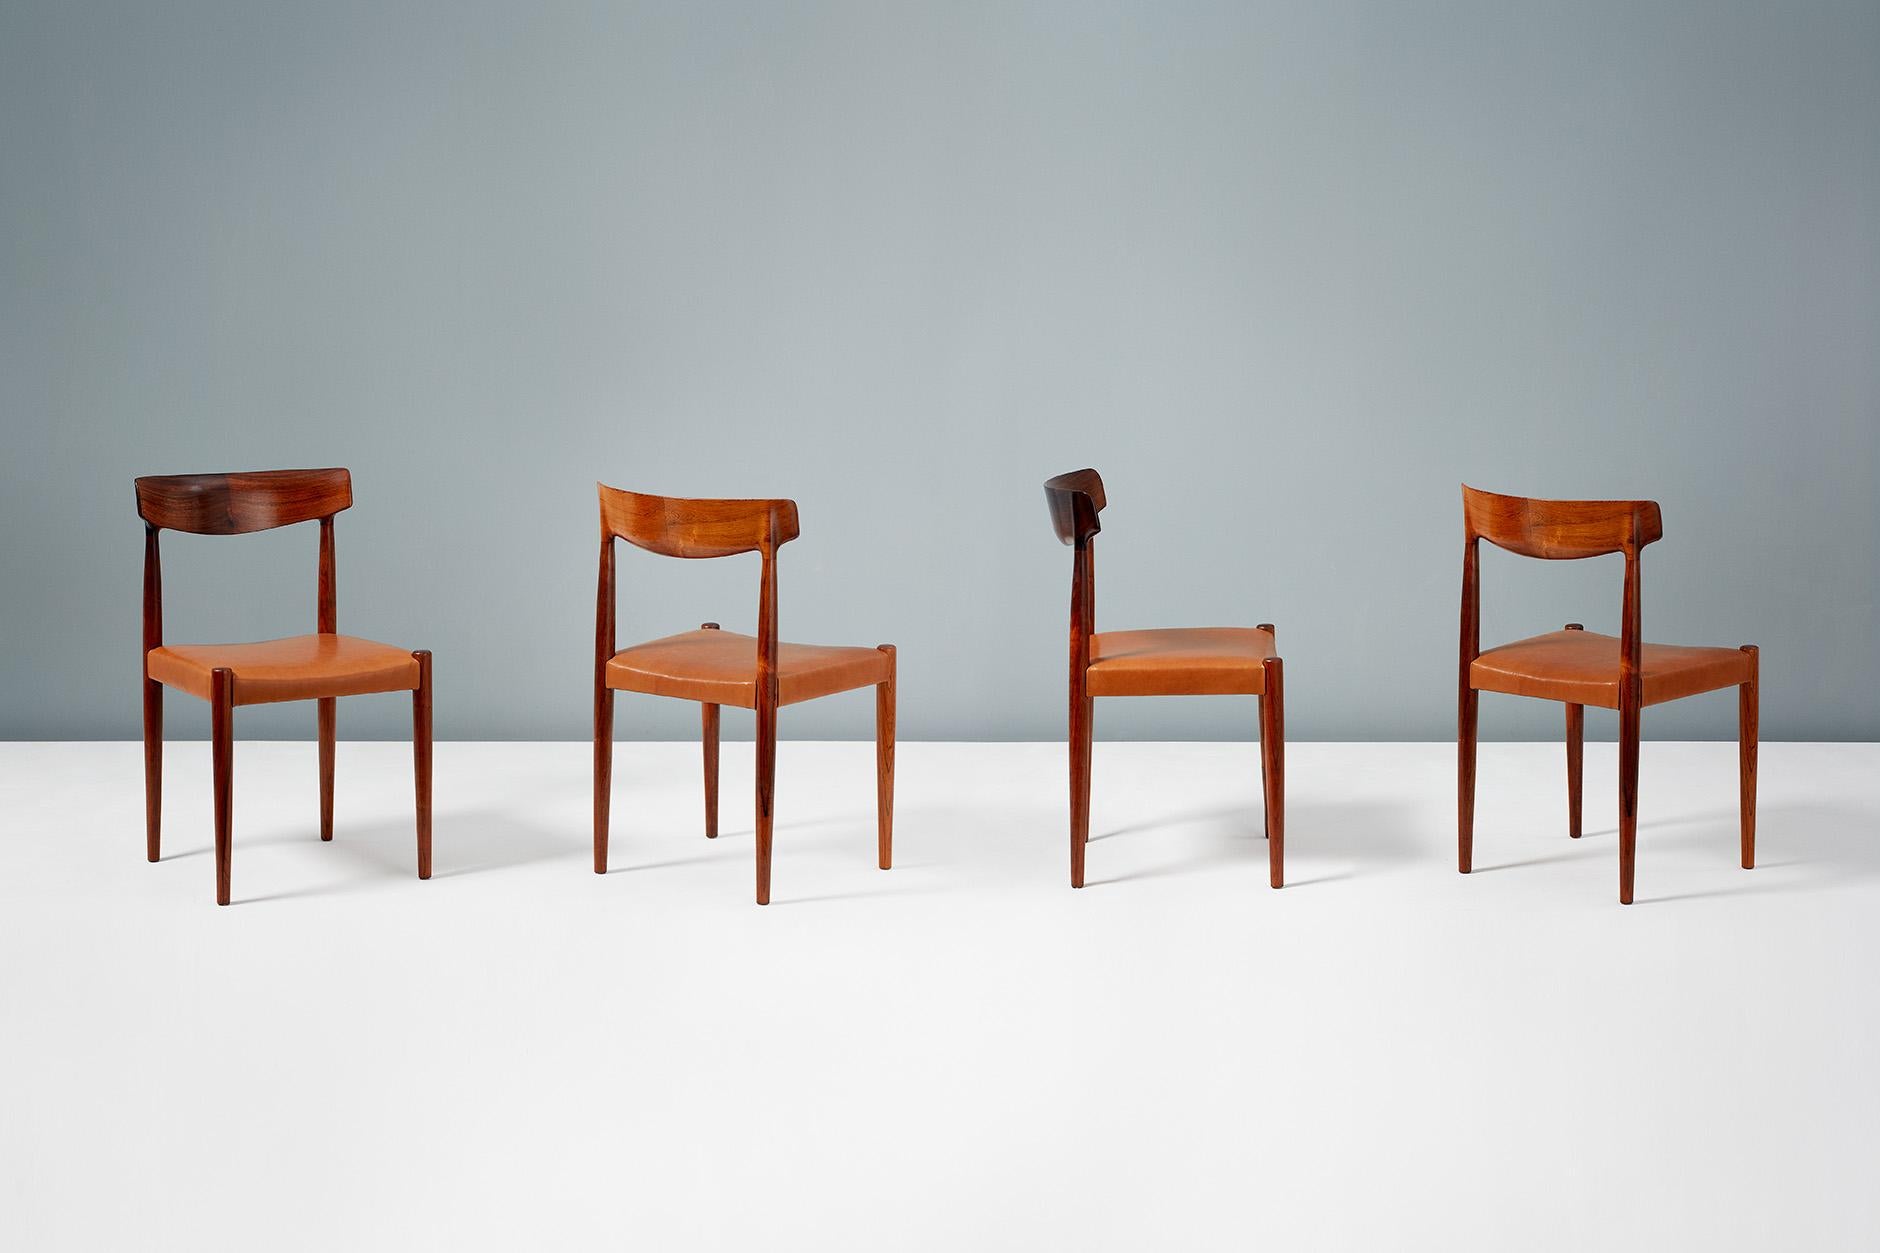 Knud Faerch Set of 8 Model 343 Dining Chairs, Rosewood and Leather 1